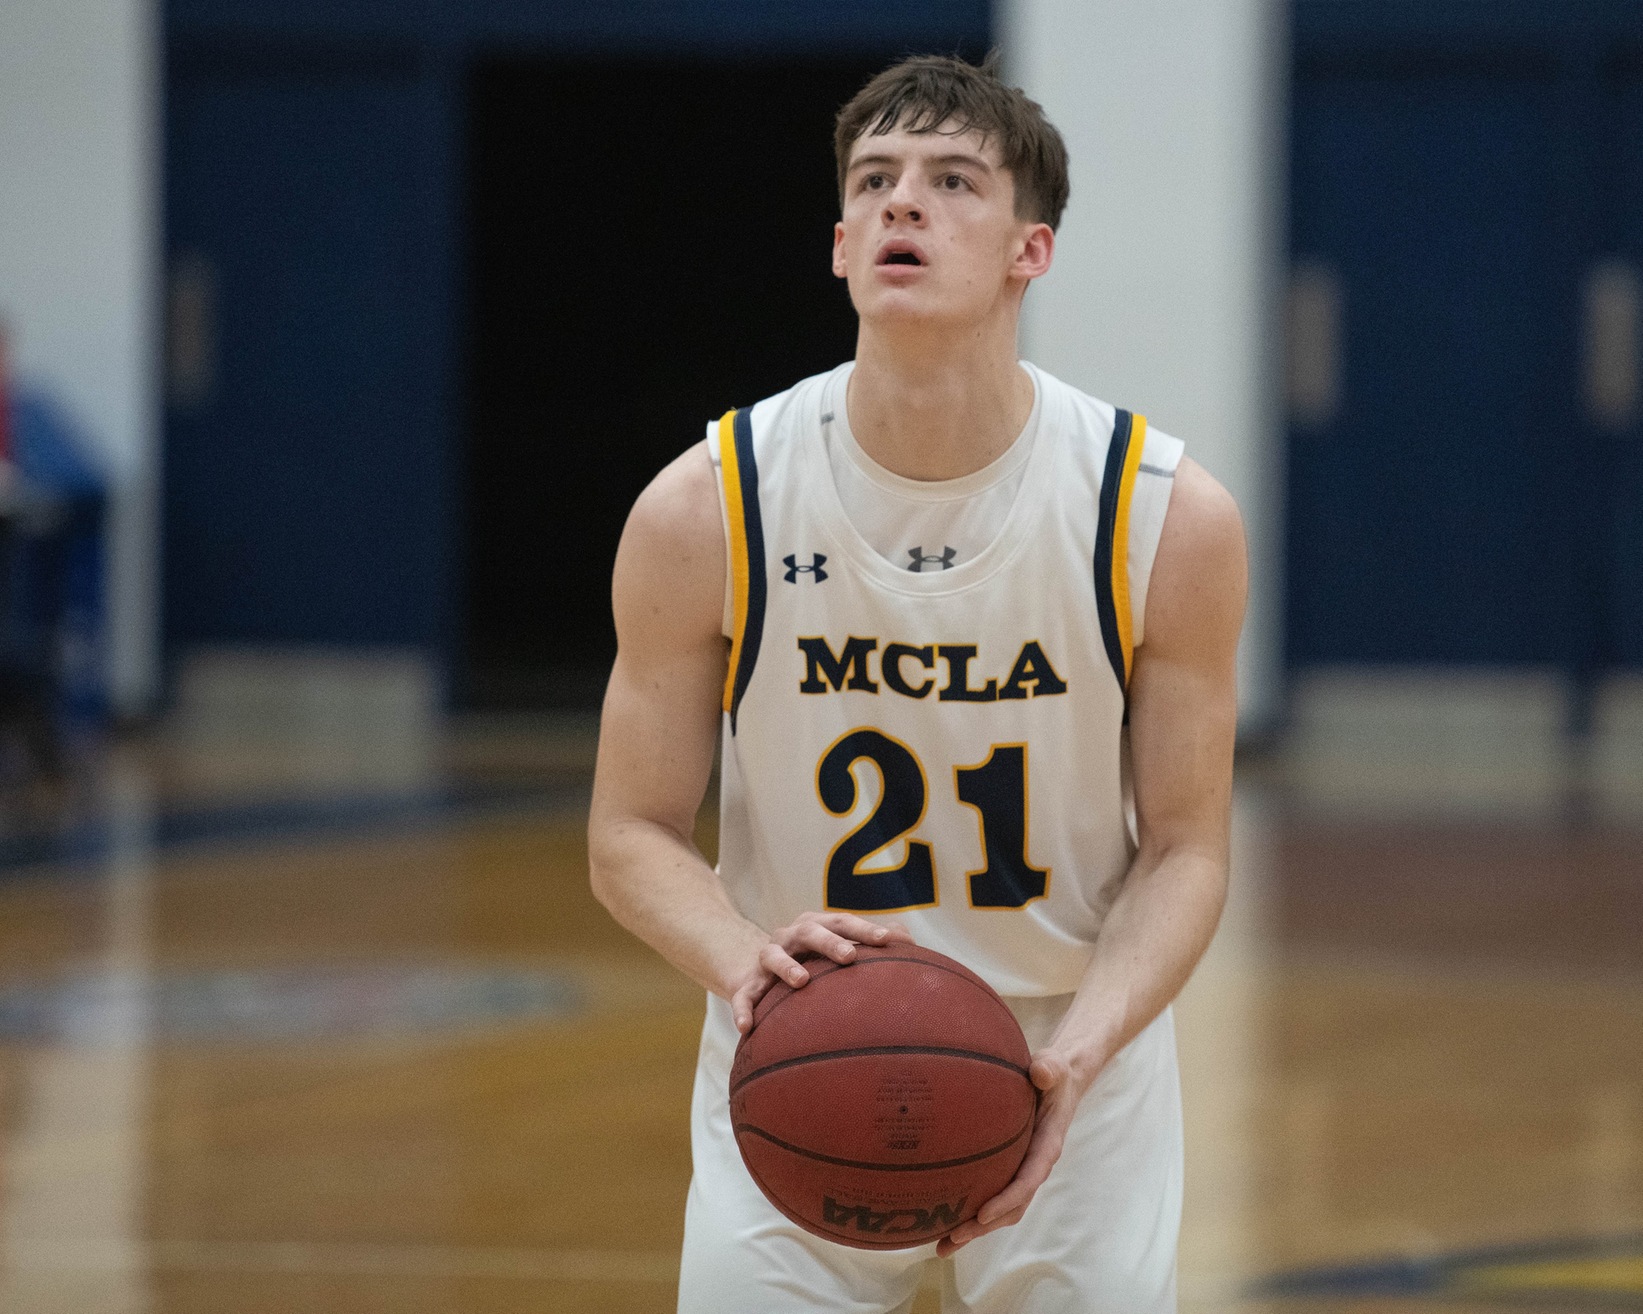 Yearsley's clutch baskets lift Men's Basketball to ninth straight win in showdown with Lancers